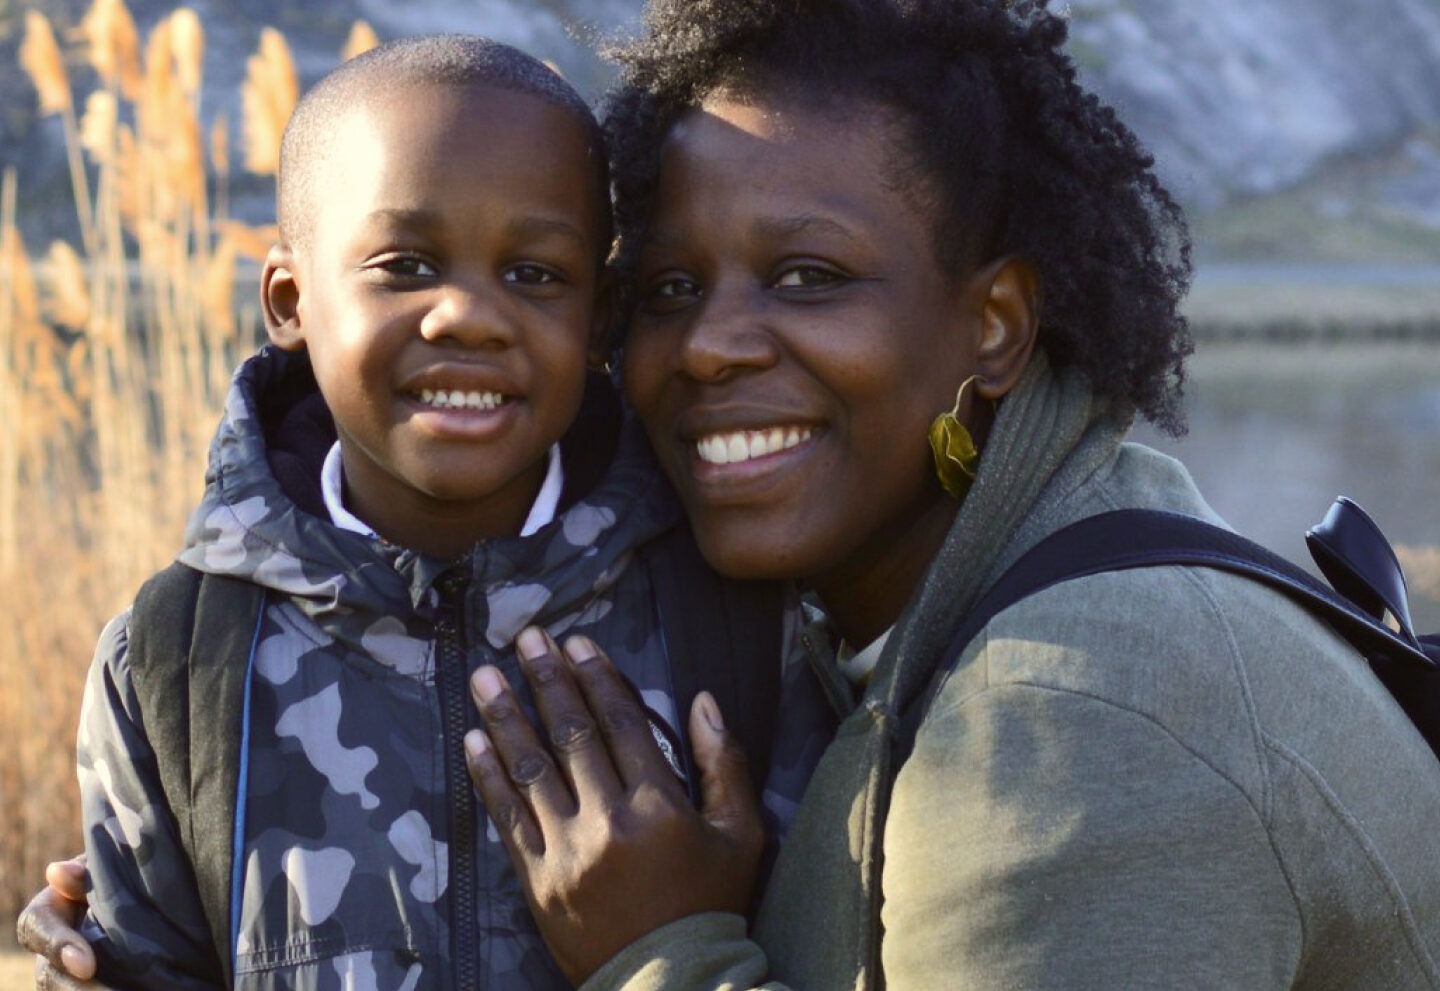 A Black mother and son are outside in the sunshine. The mother crouches to hug her son, their faces touching as they look at the camera, smiling.